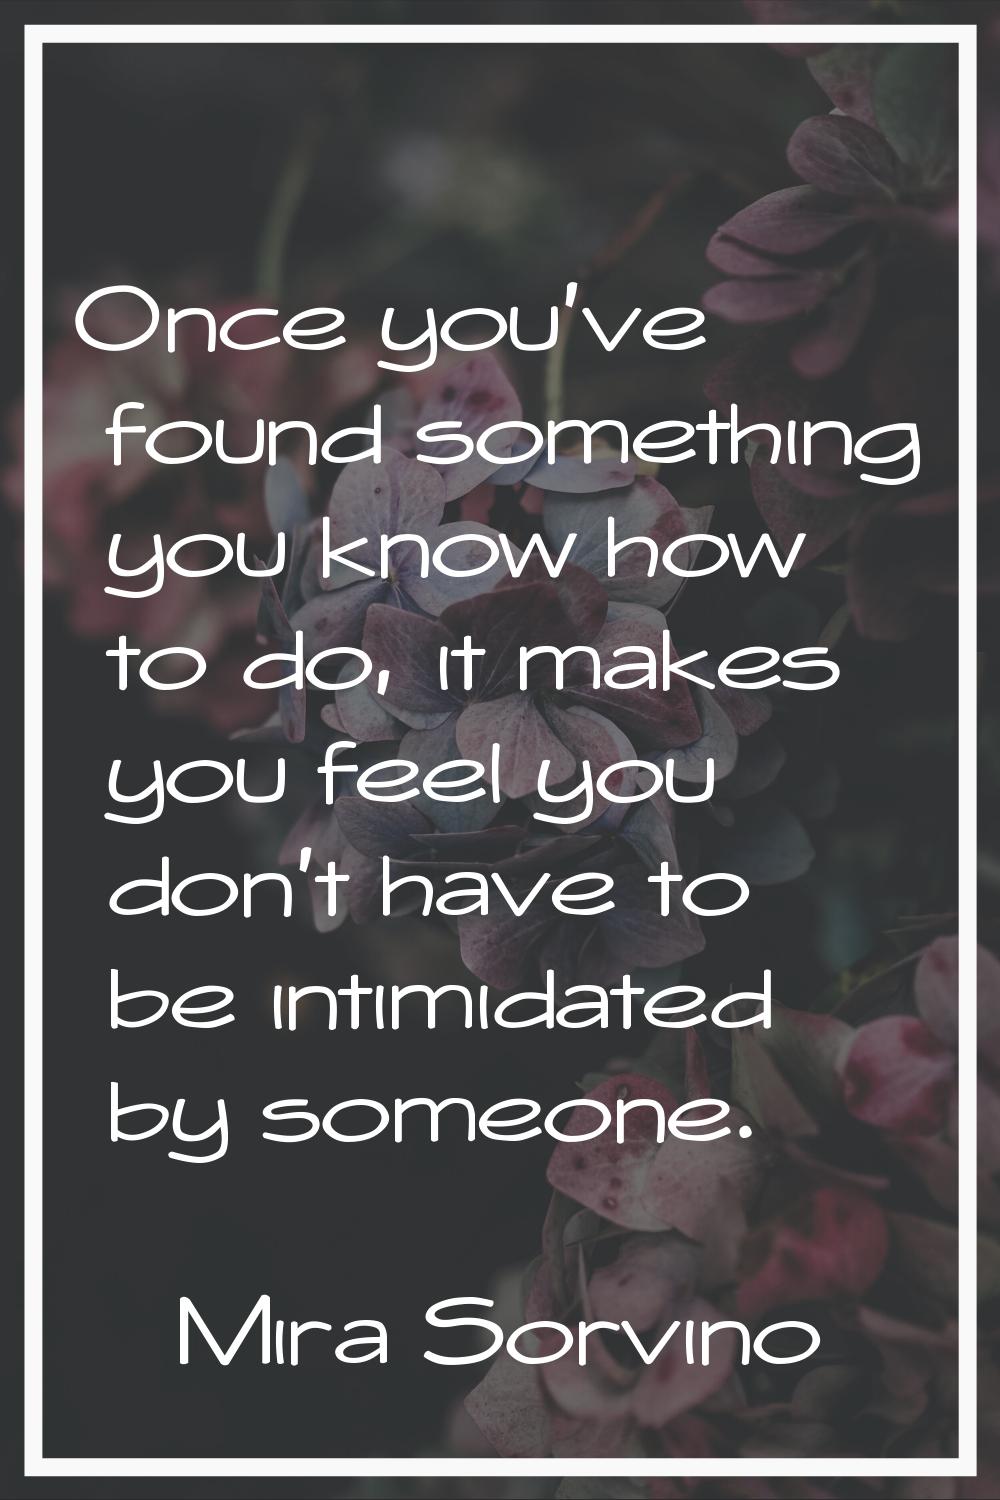 Once you've found something you know how to do, it makes you feel you don't have to be intimidated 